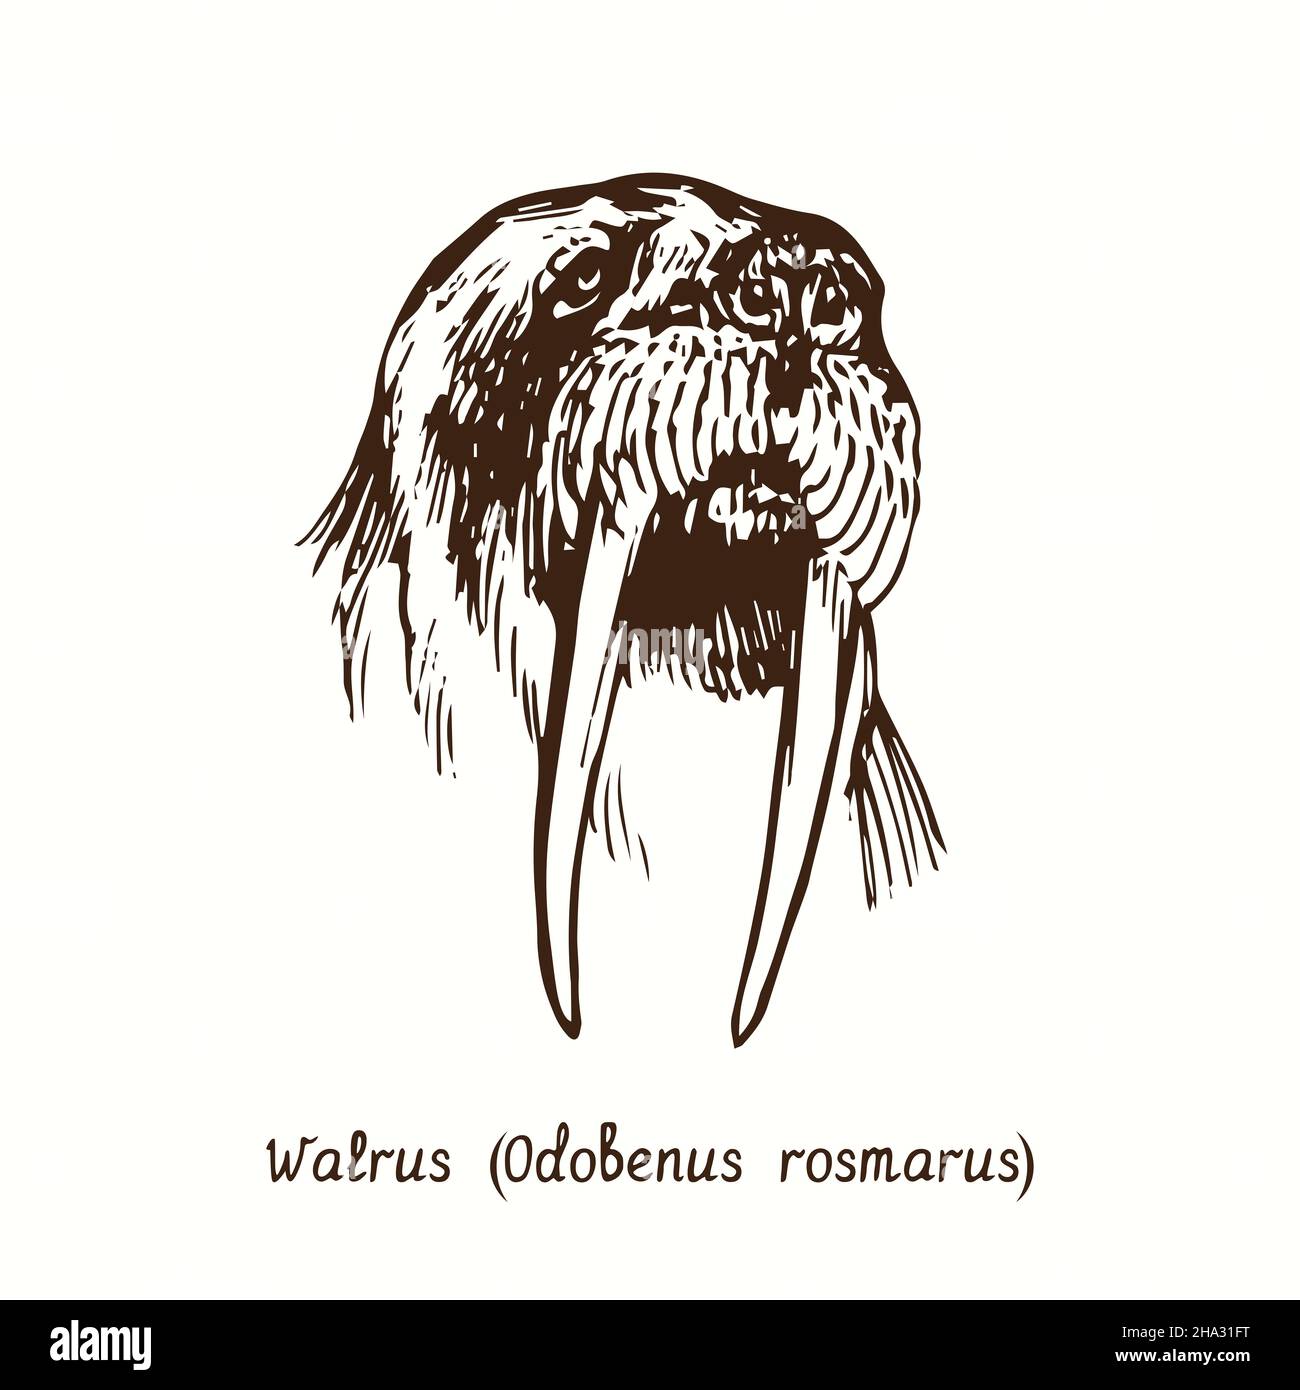 Walrus (Odobenus rosmarus)  head front view. Ink black and white doodle drawing in woodcut style. Stock Photo